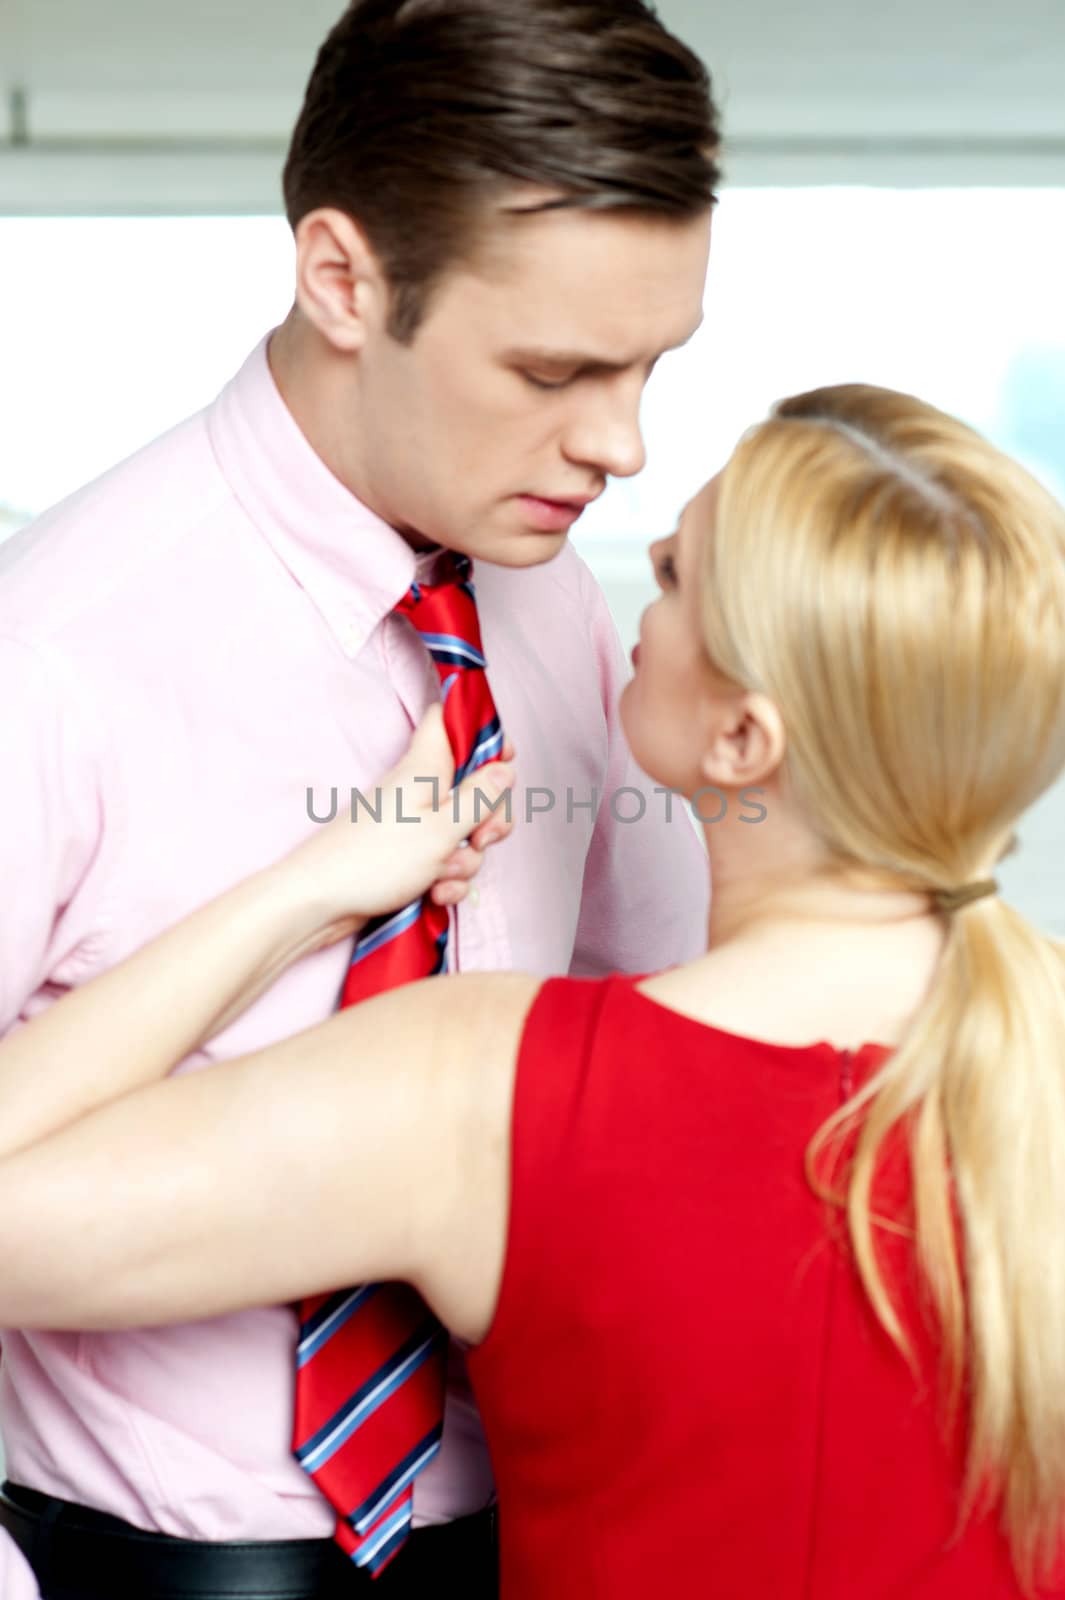 Female secretary forcing boss to love her by stockyimages